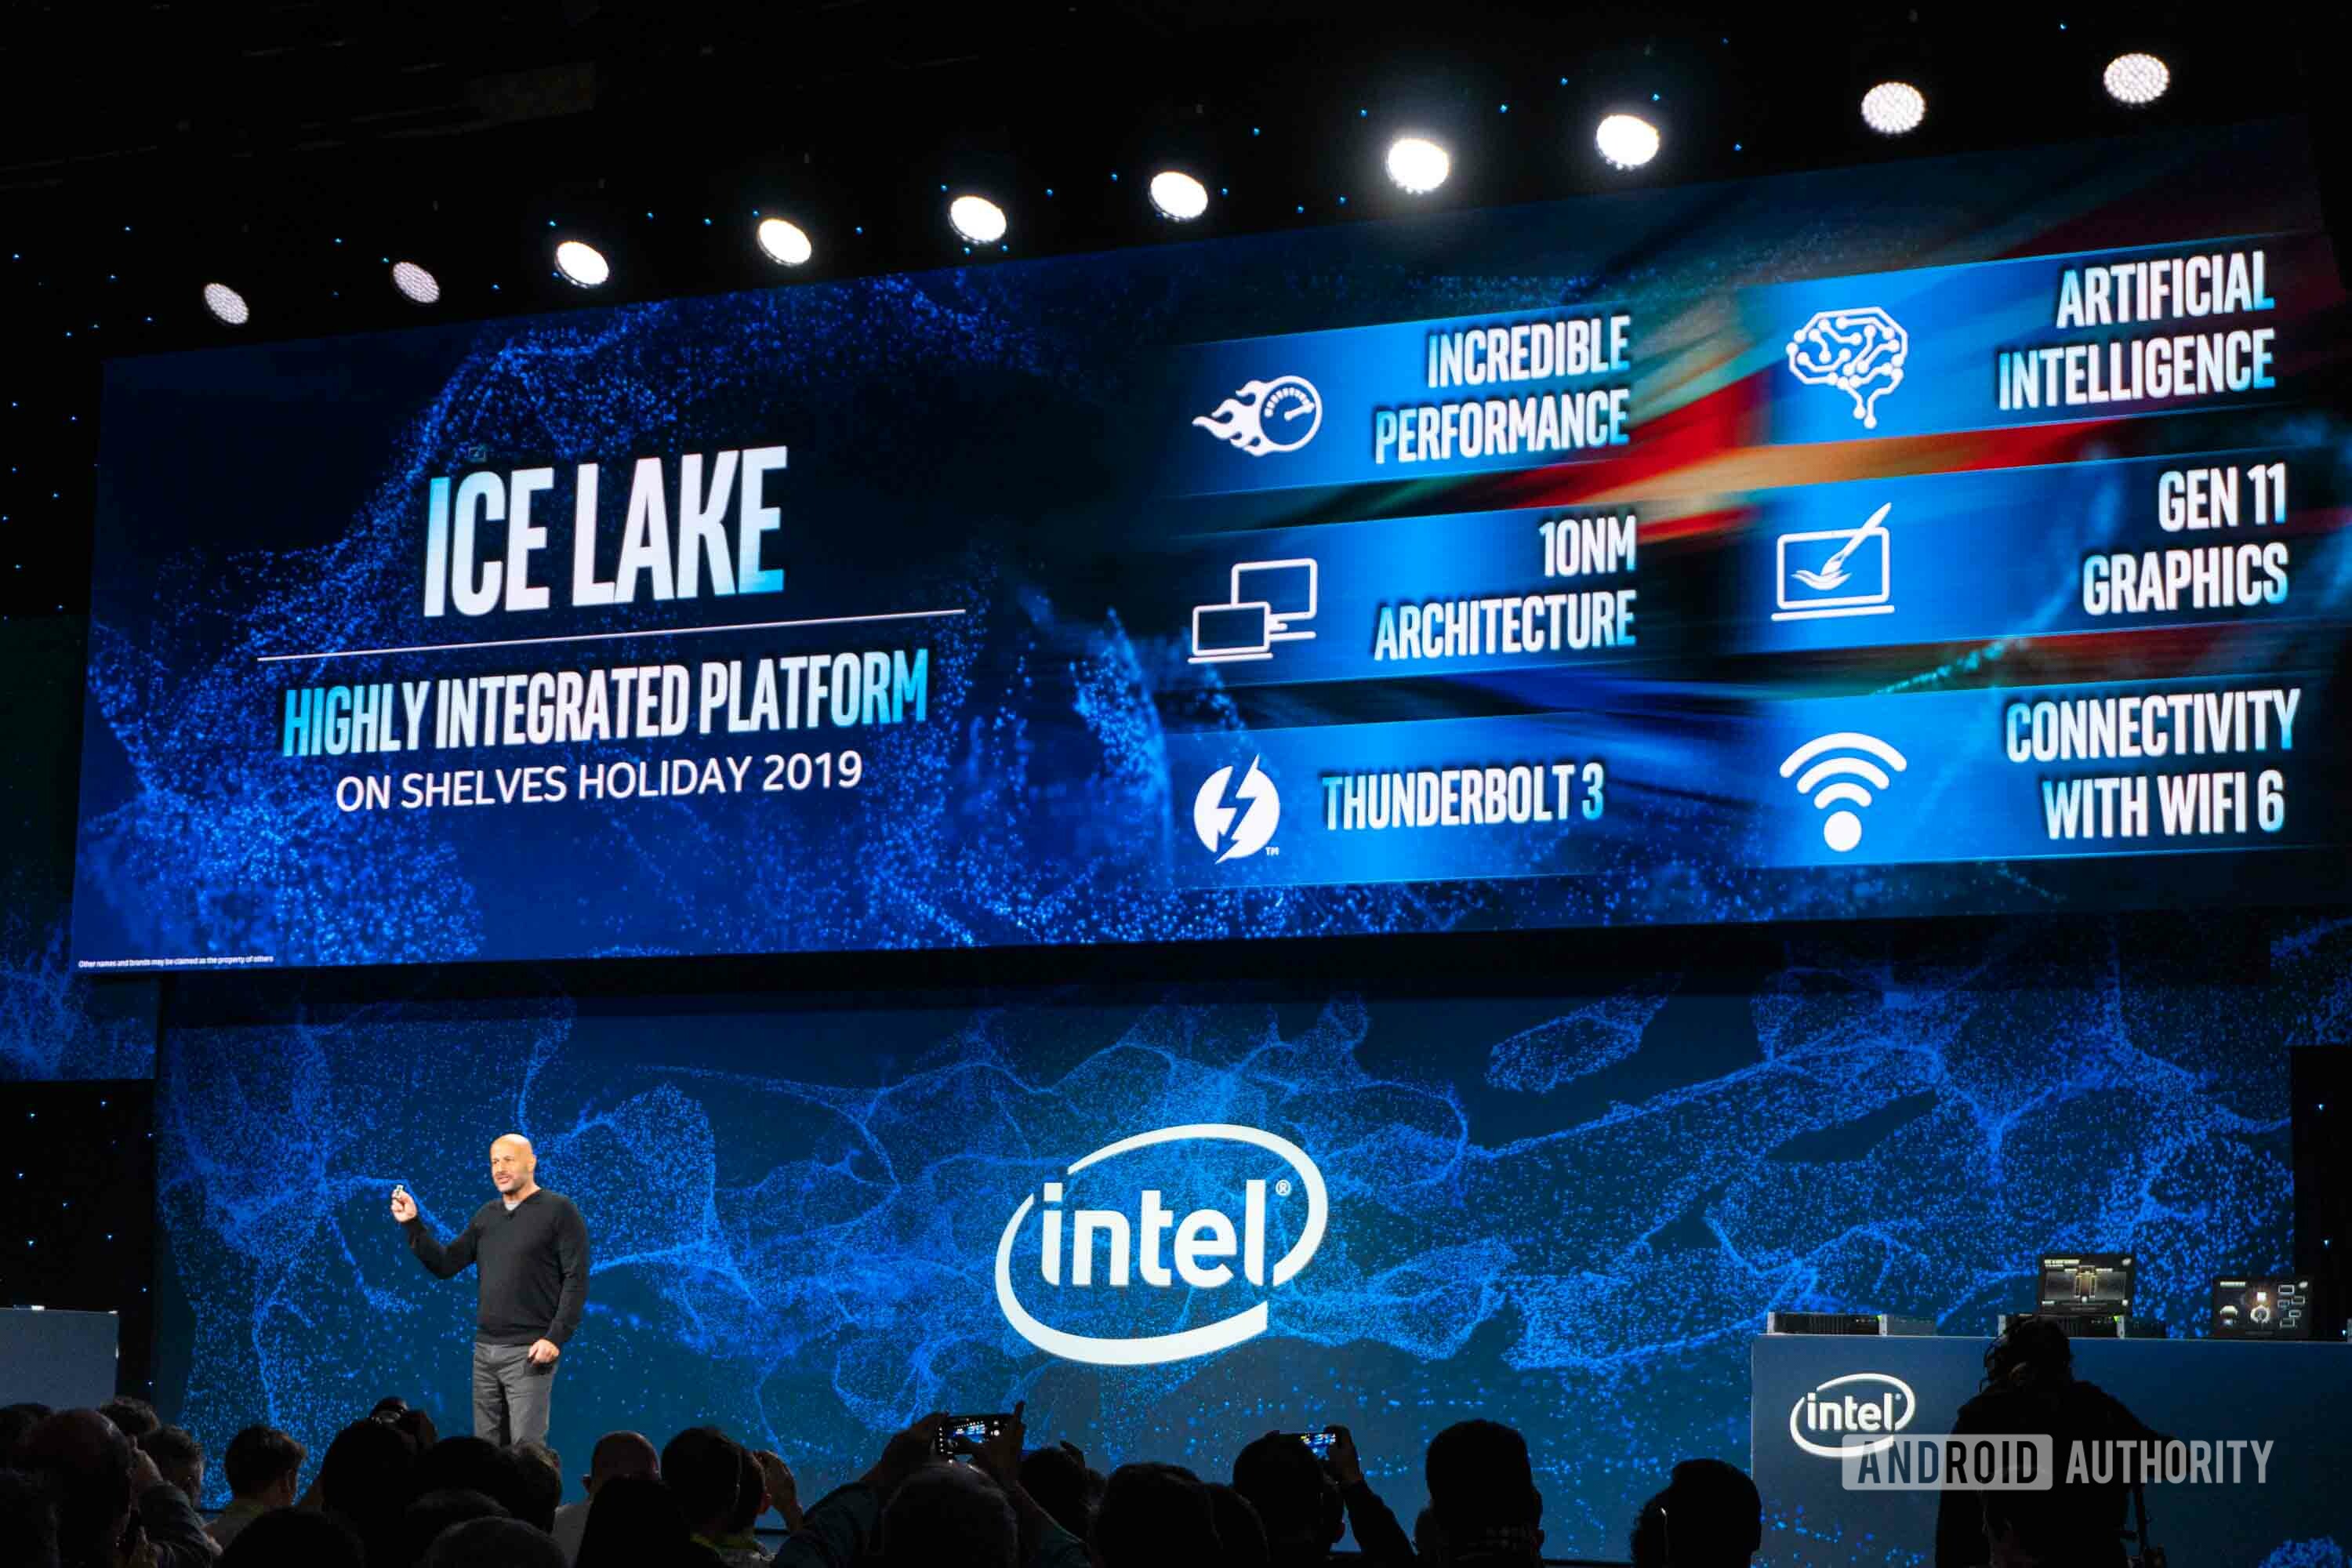 The Ice Lake slide at Intel's CES 2019 conference.